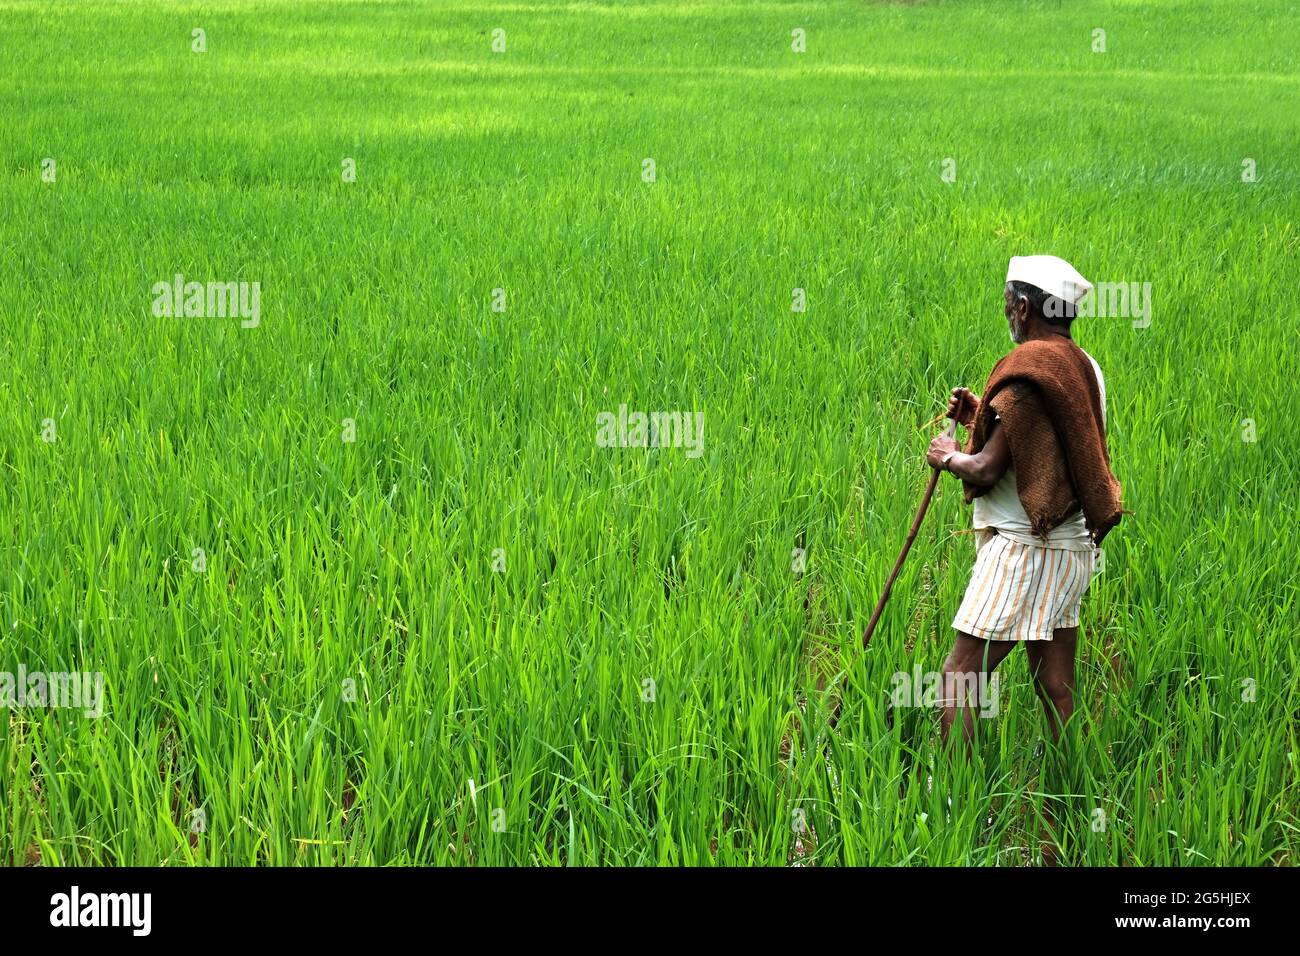 Bhor, Maharashtra, India - July 2019, A old age man in white shirt standing in the field carrying wooden stick. Stock Photo